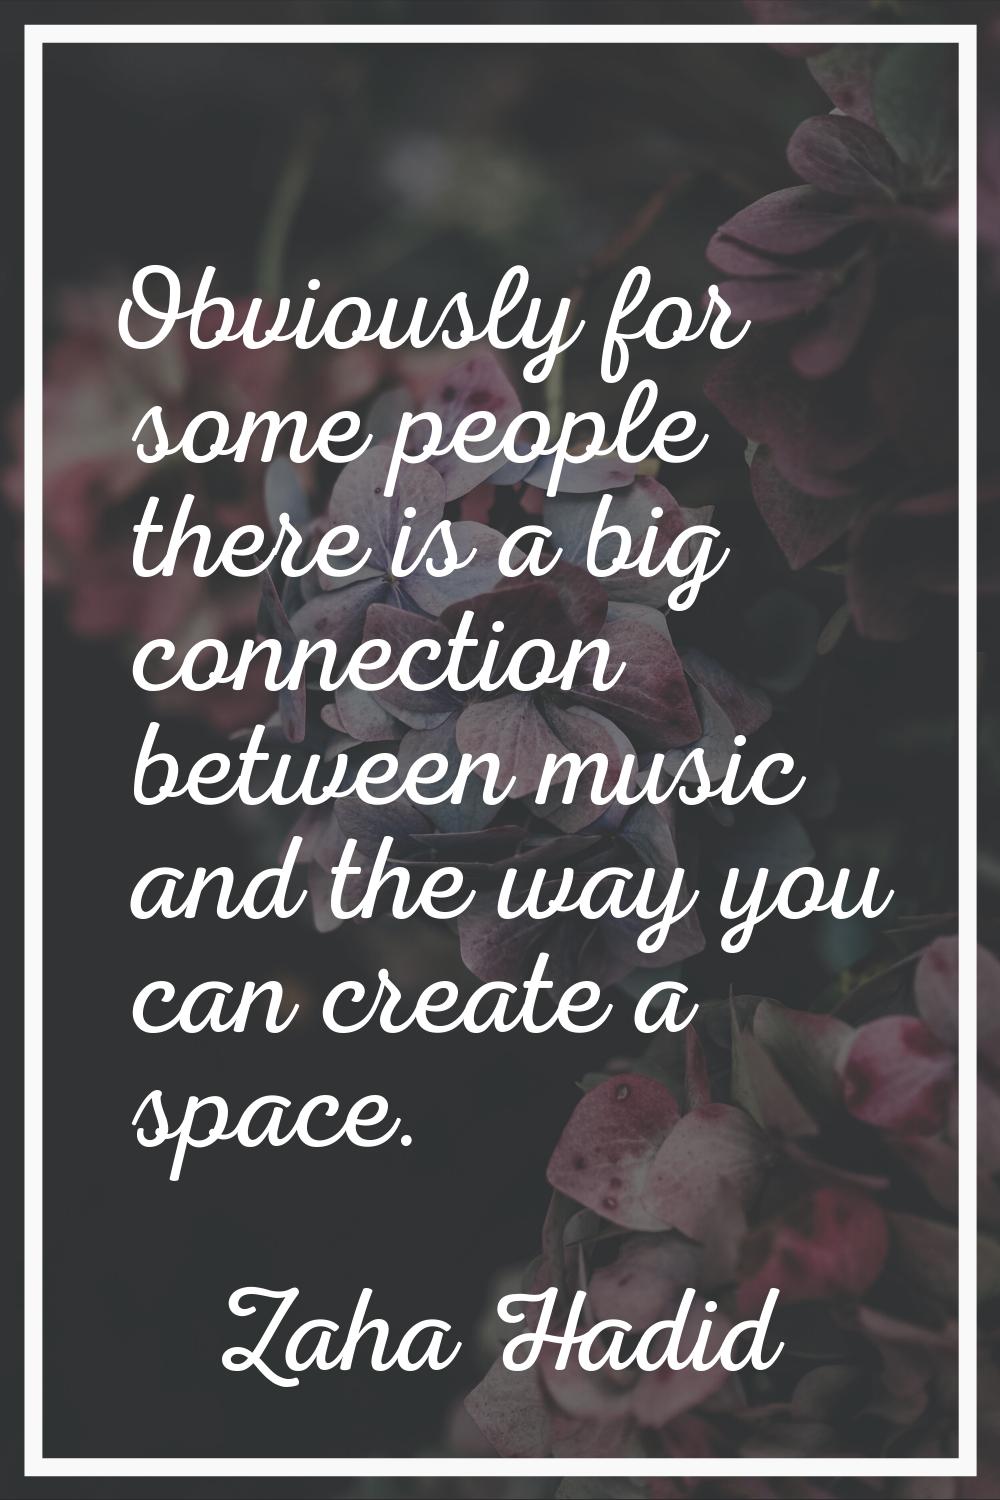 Obviously for some people there is a big connection between music and the way you can create a spac